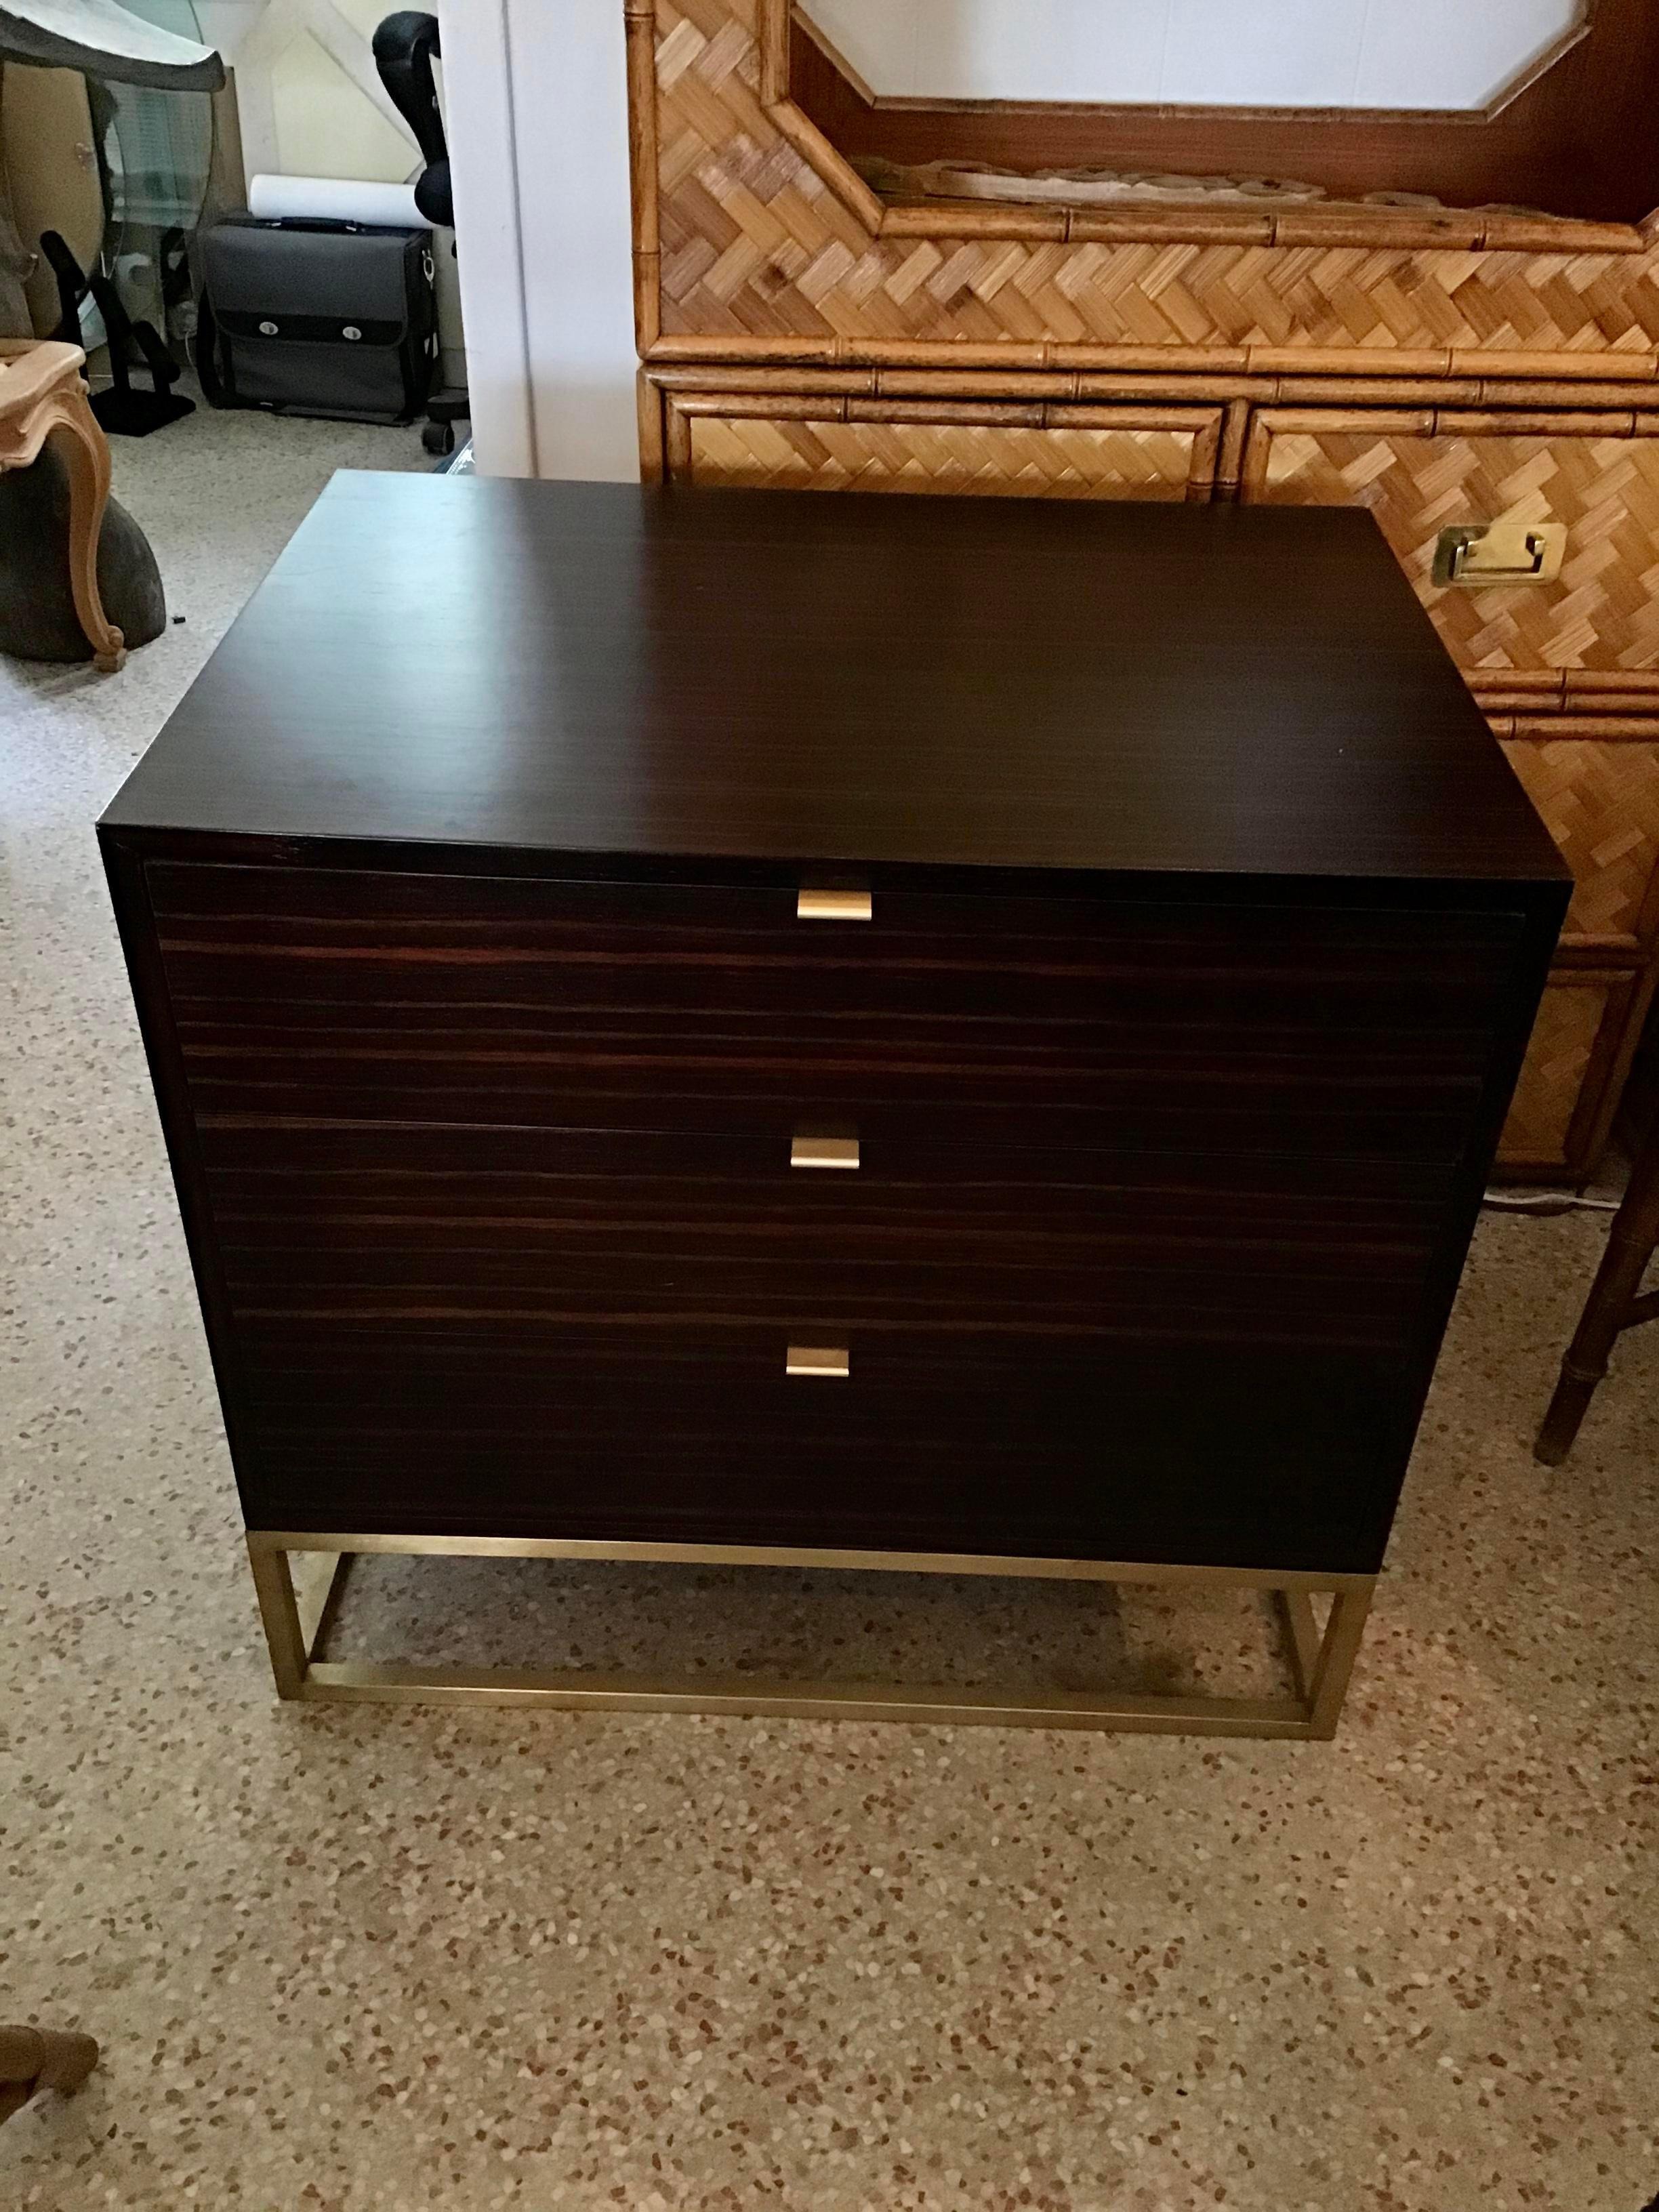 Large Todd Hase designed Maxwell 3 drawer nightstand in macassar/ebony. Could be used as a nightstand or dresser. Typical floor sample condition.